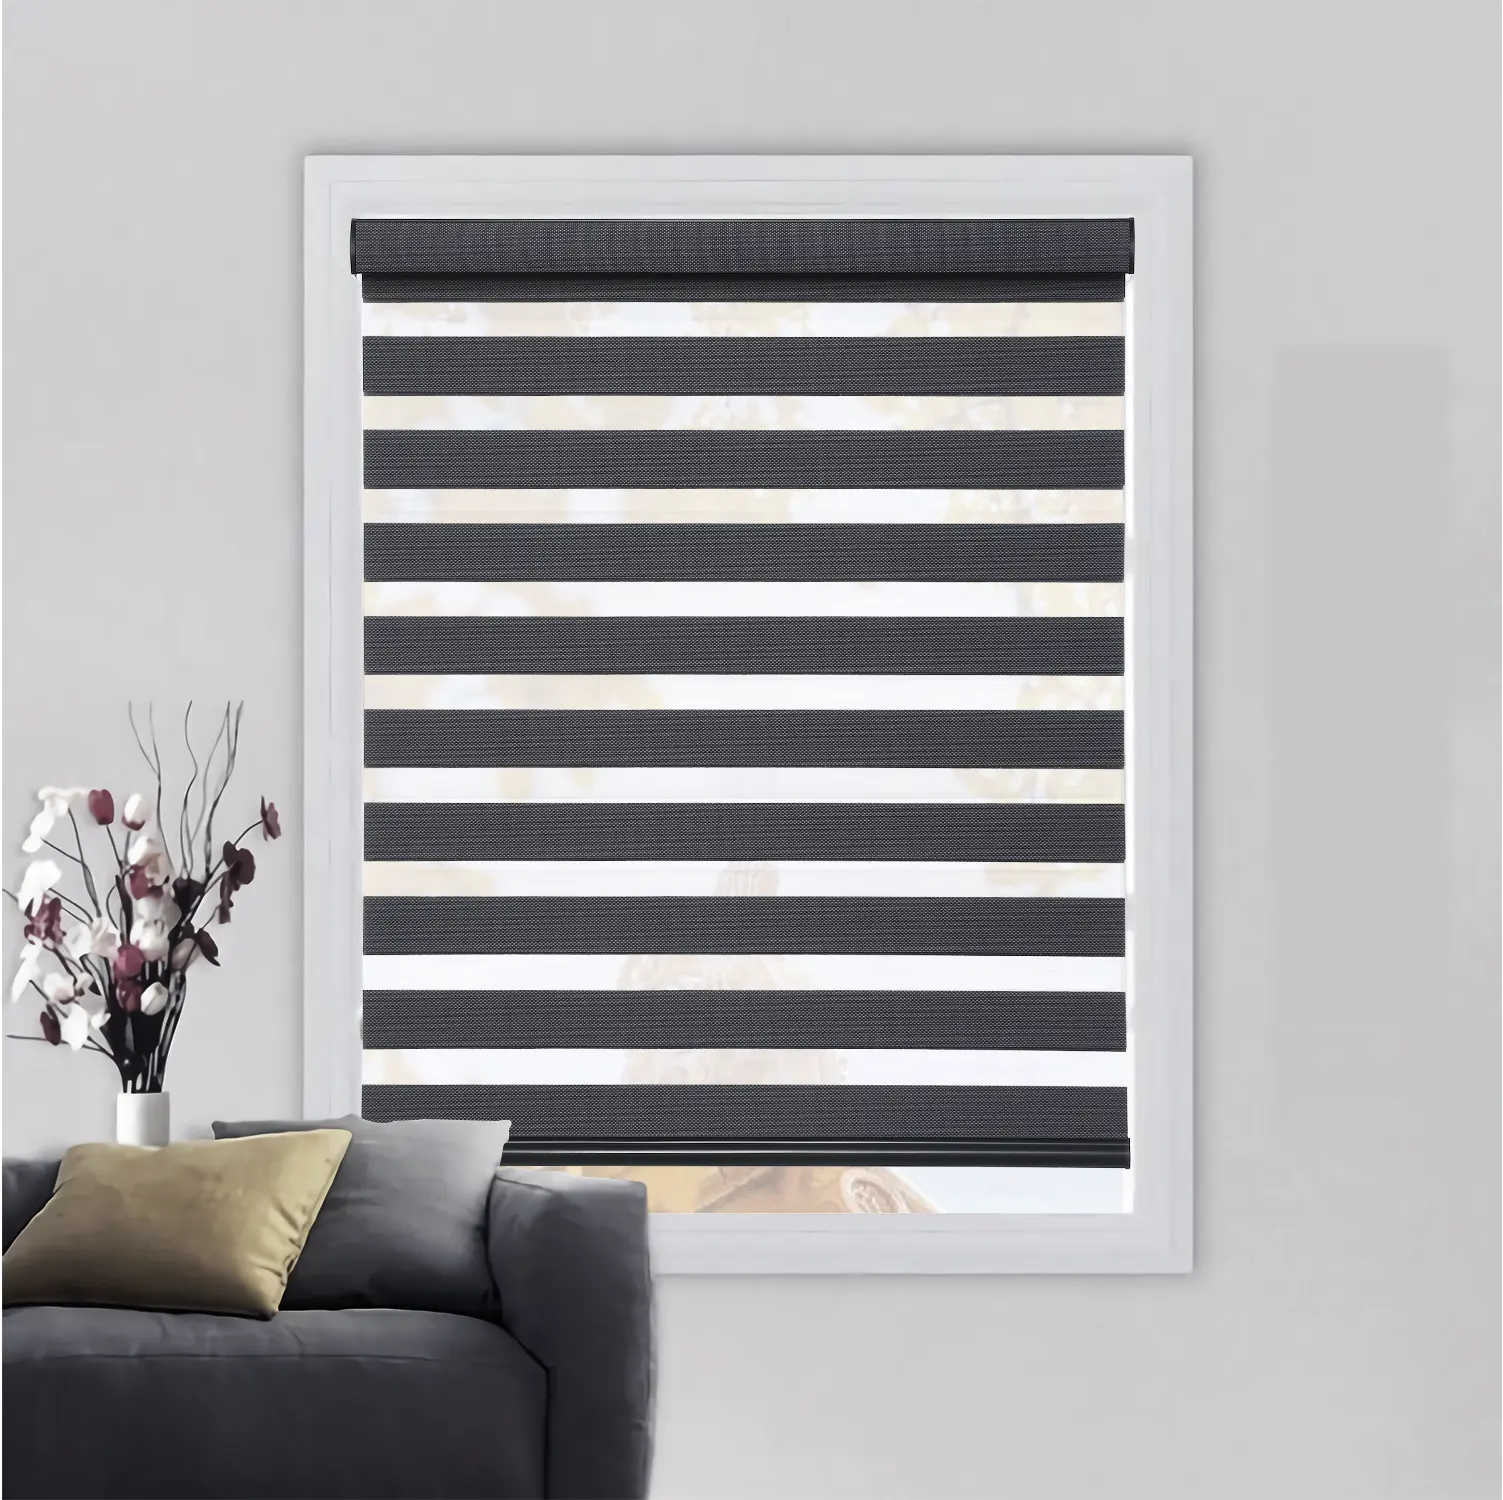 Smart Remote Control Blackout Blinds Electric Double Layer Zebra Blinds Motorized Fabric Roll For Meeting Room